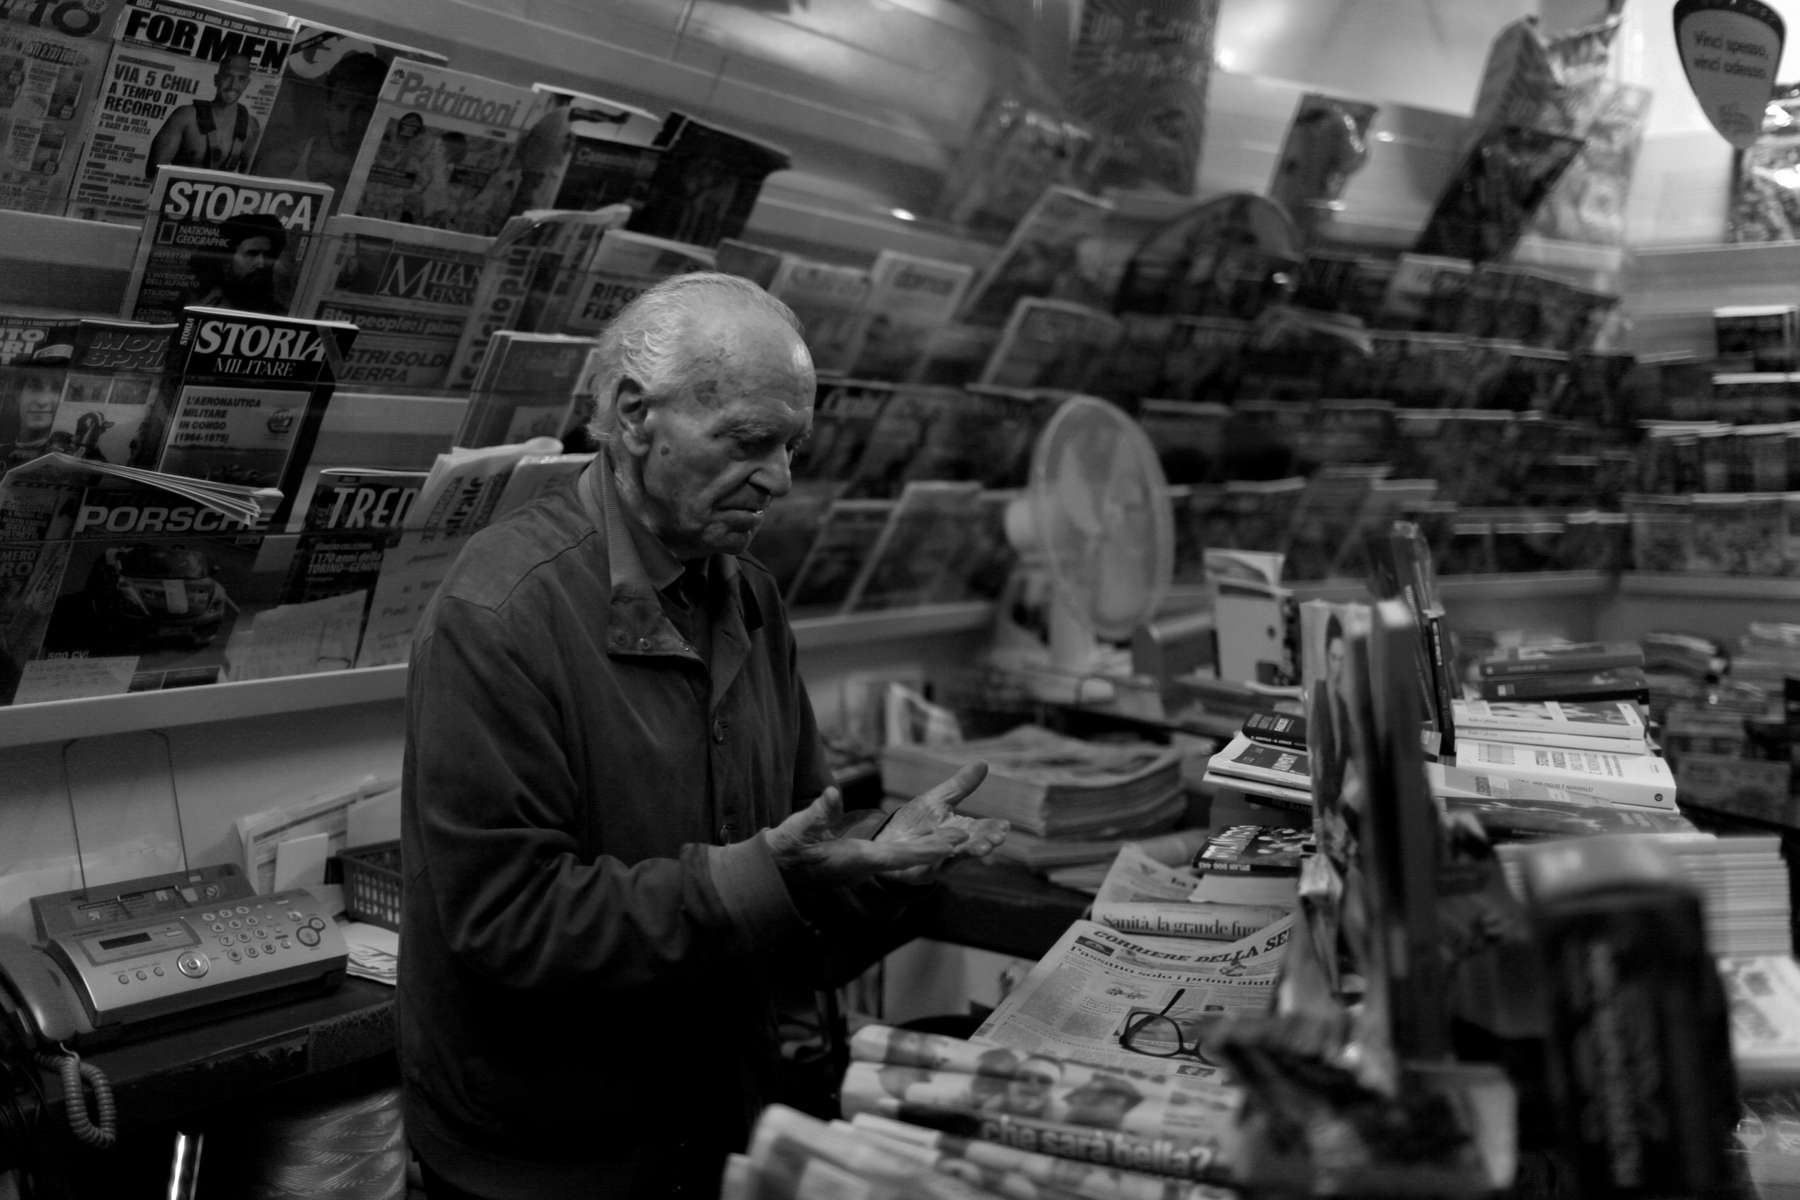 On Sunday, October 22, 2023, Piero Scartoni, 91, pauses to look at the newsprint on his hands.  His daughter Cristiana has told him that someone else is coming in the next week to take over the managing of the newsstand.  It has been difficult to find anyone willing to take Scartoni's place and now someone has been found. 